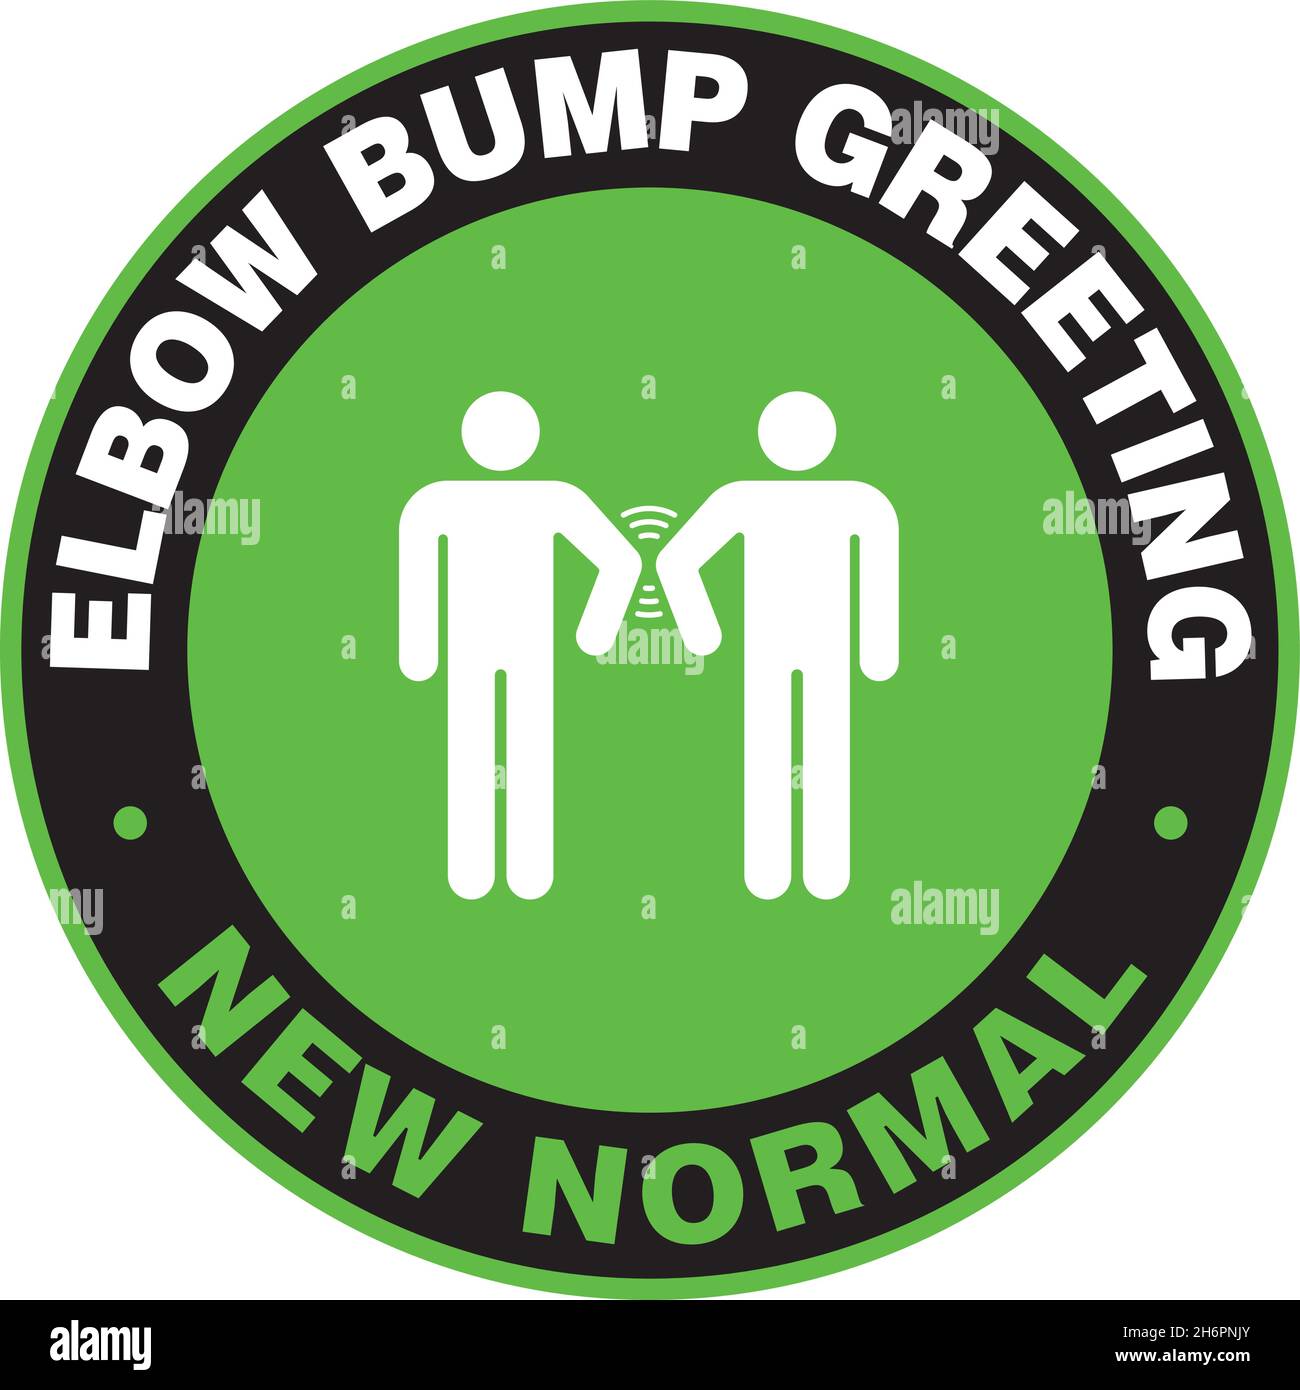 No handshake, use Elbow Bump for Greetigs. Signage or Sticker for help reduce the risk of catching coronavirus Covid-19. Vector Door Sign or Sticker. Open business as New Normal. Stock Vector